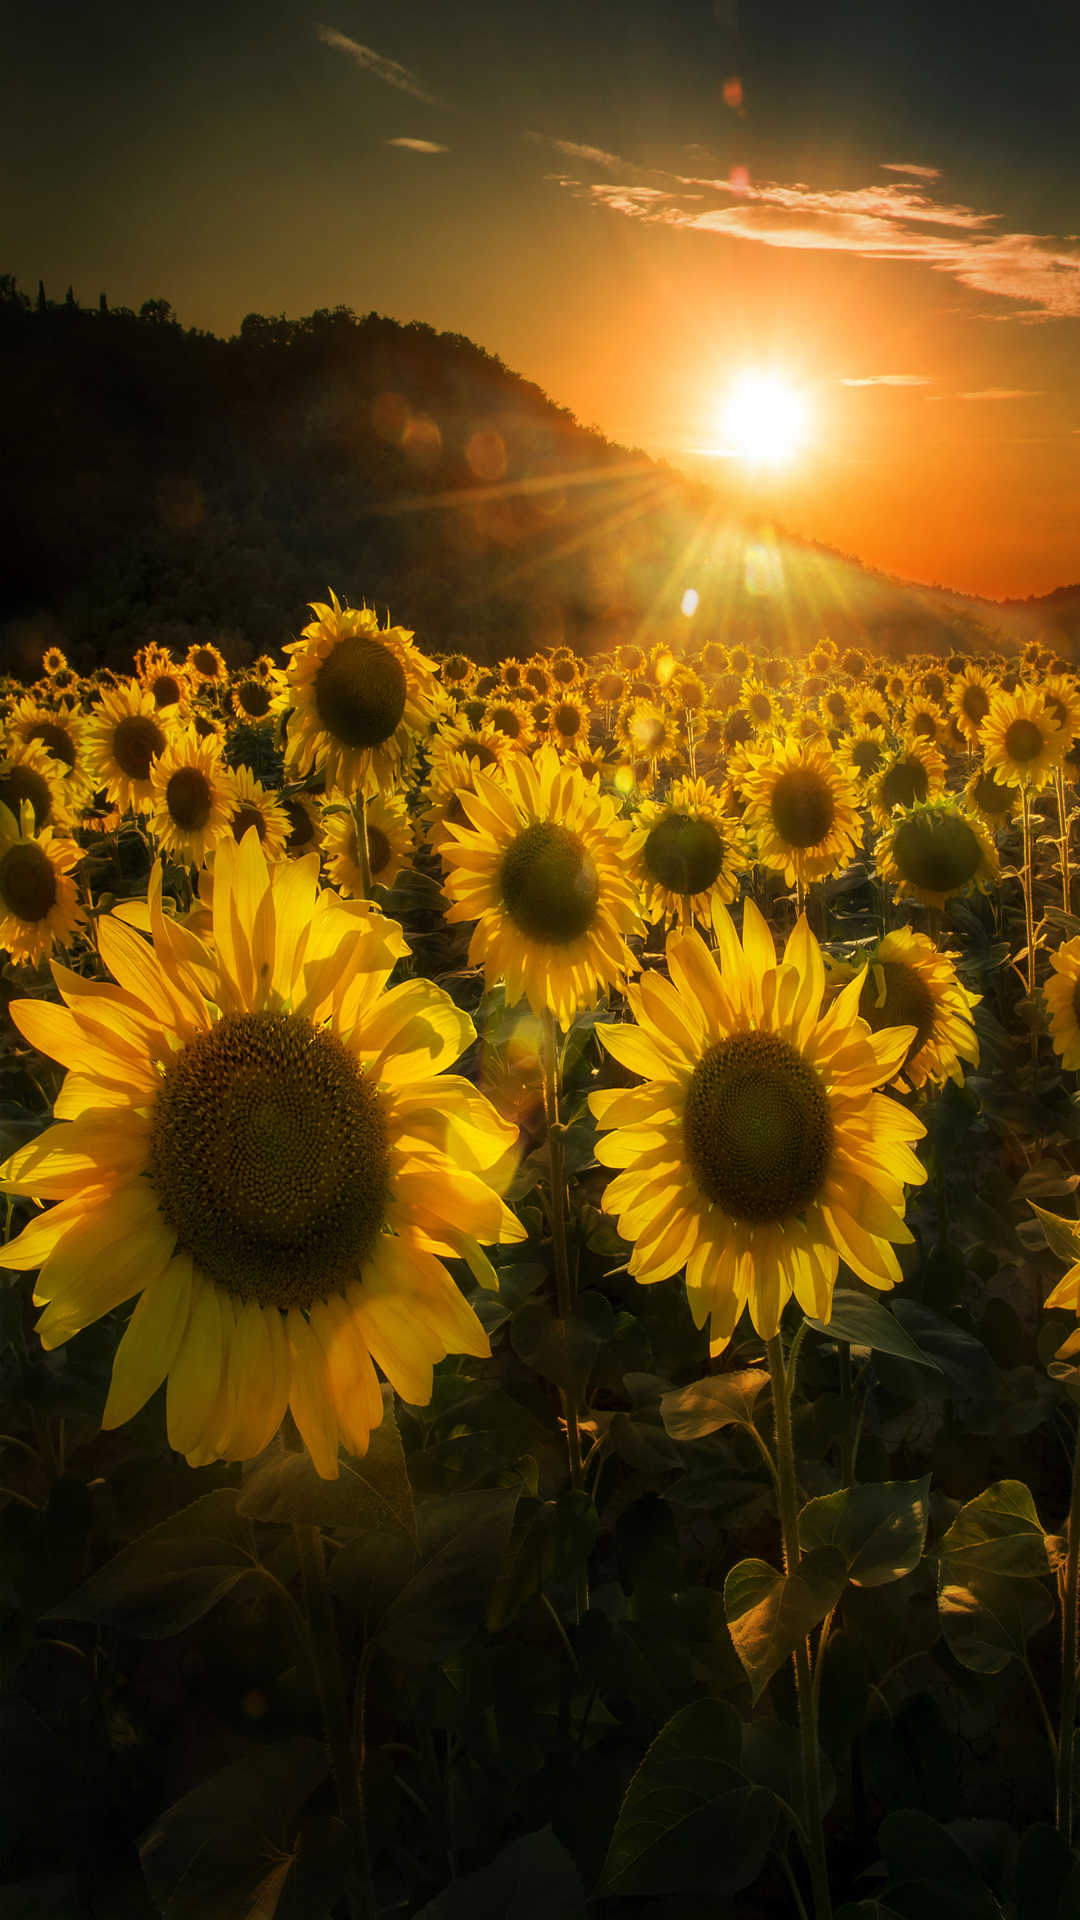 Sunflowers at sunset - The iPhone Wallpapers